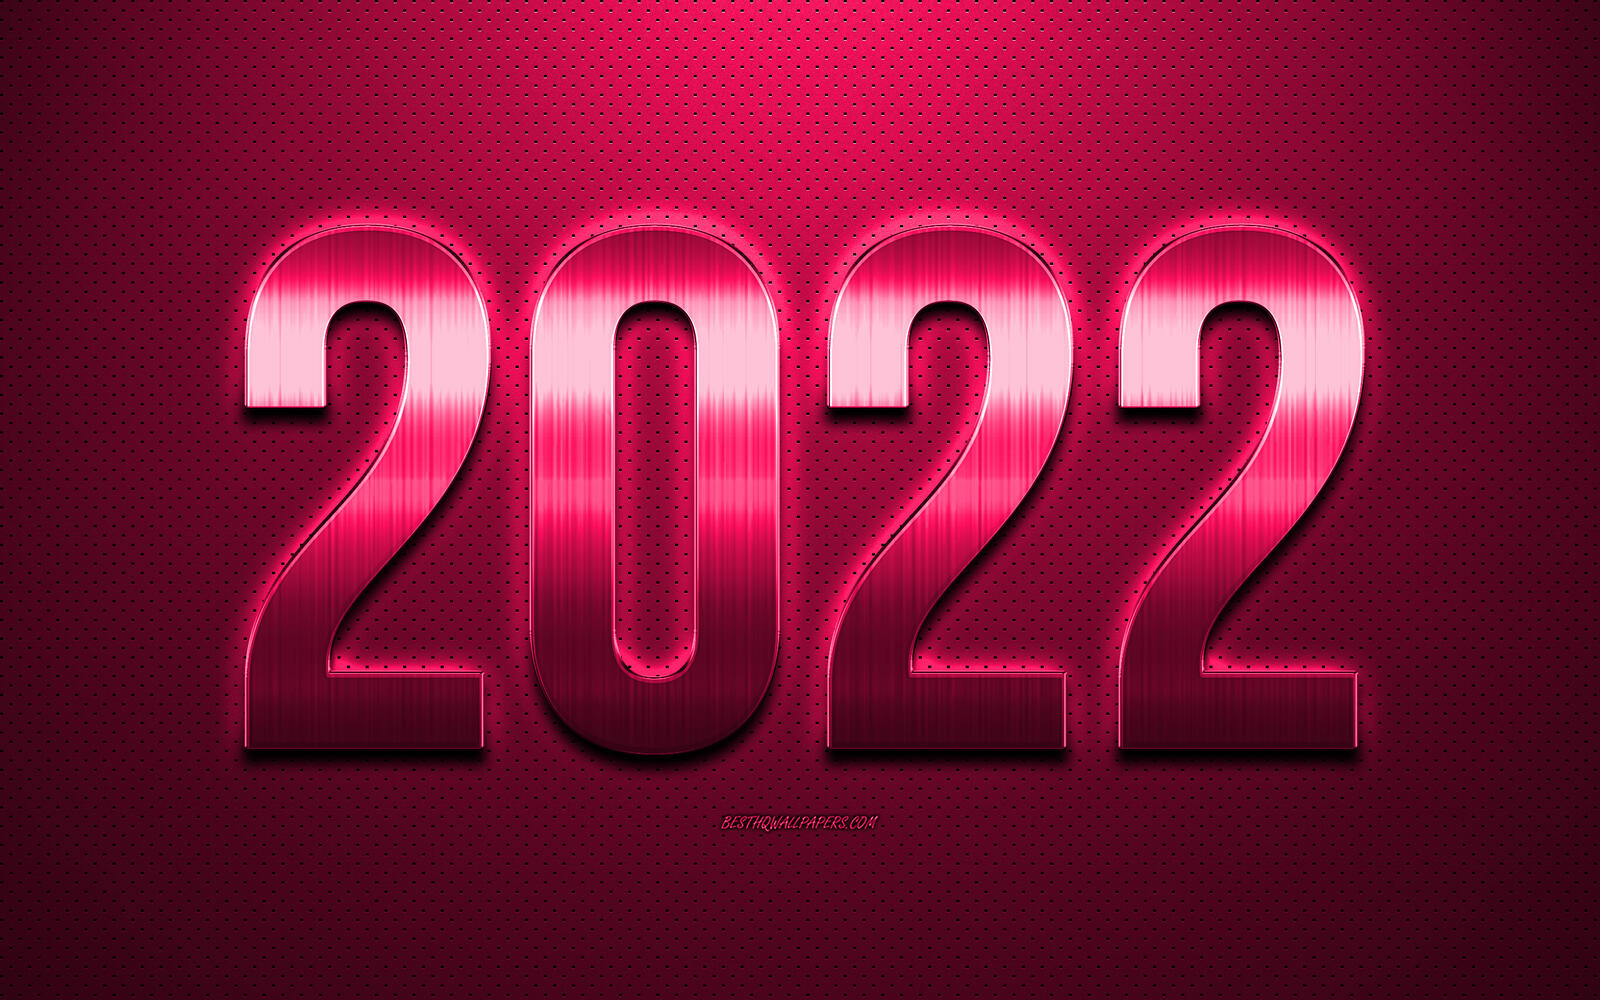 Wallpapers 2022 holiday congratulations on the year 2022 on the desktop